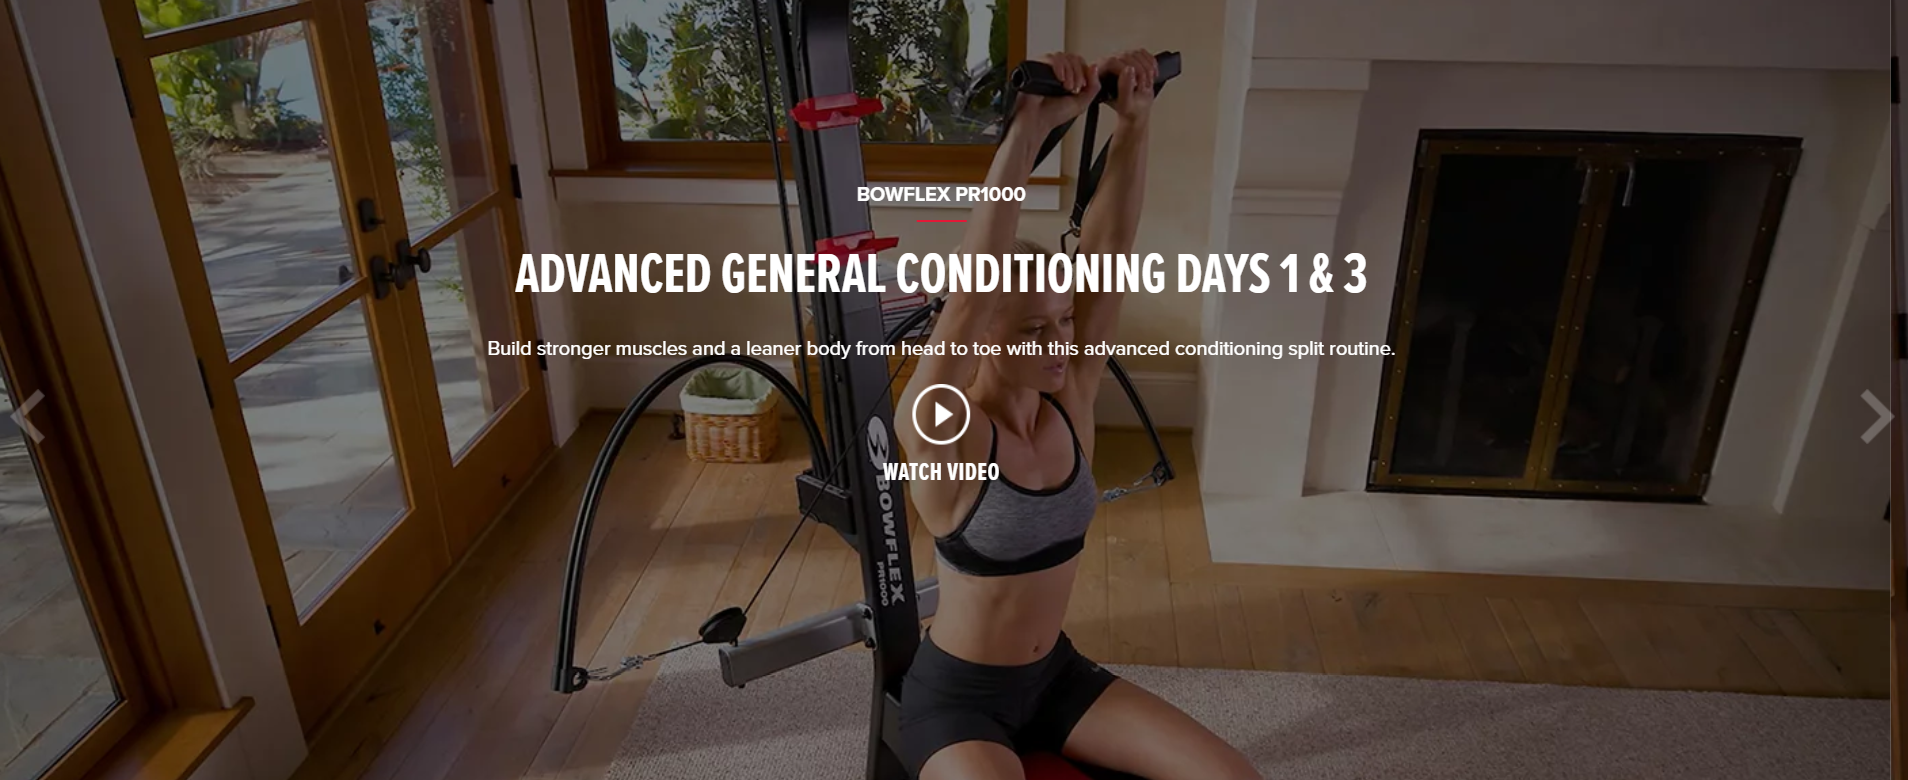 Bowflex advanced general conditioning day 1&3 YouTube video